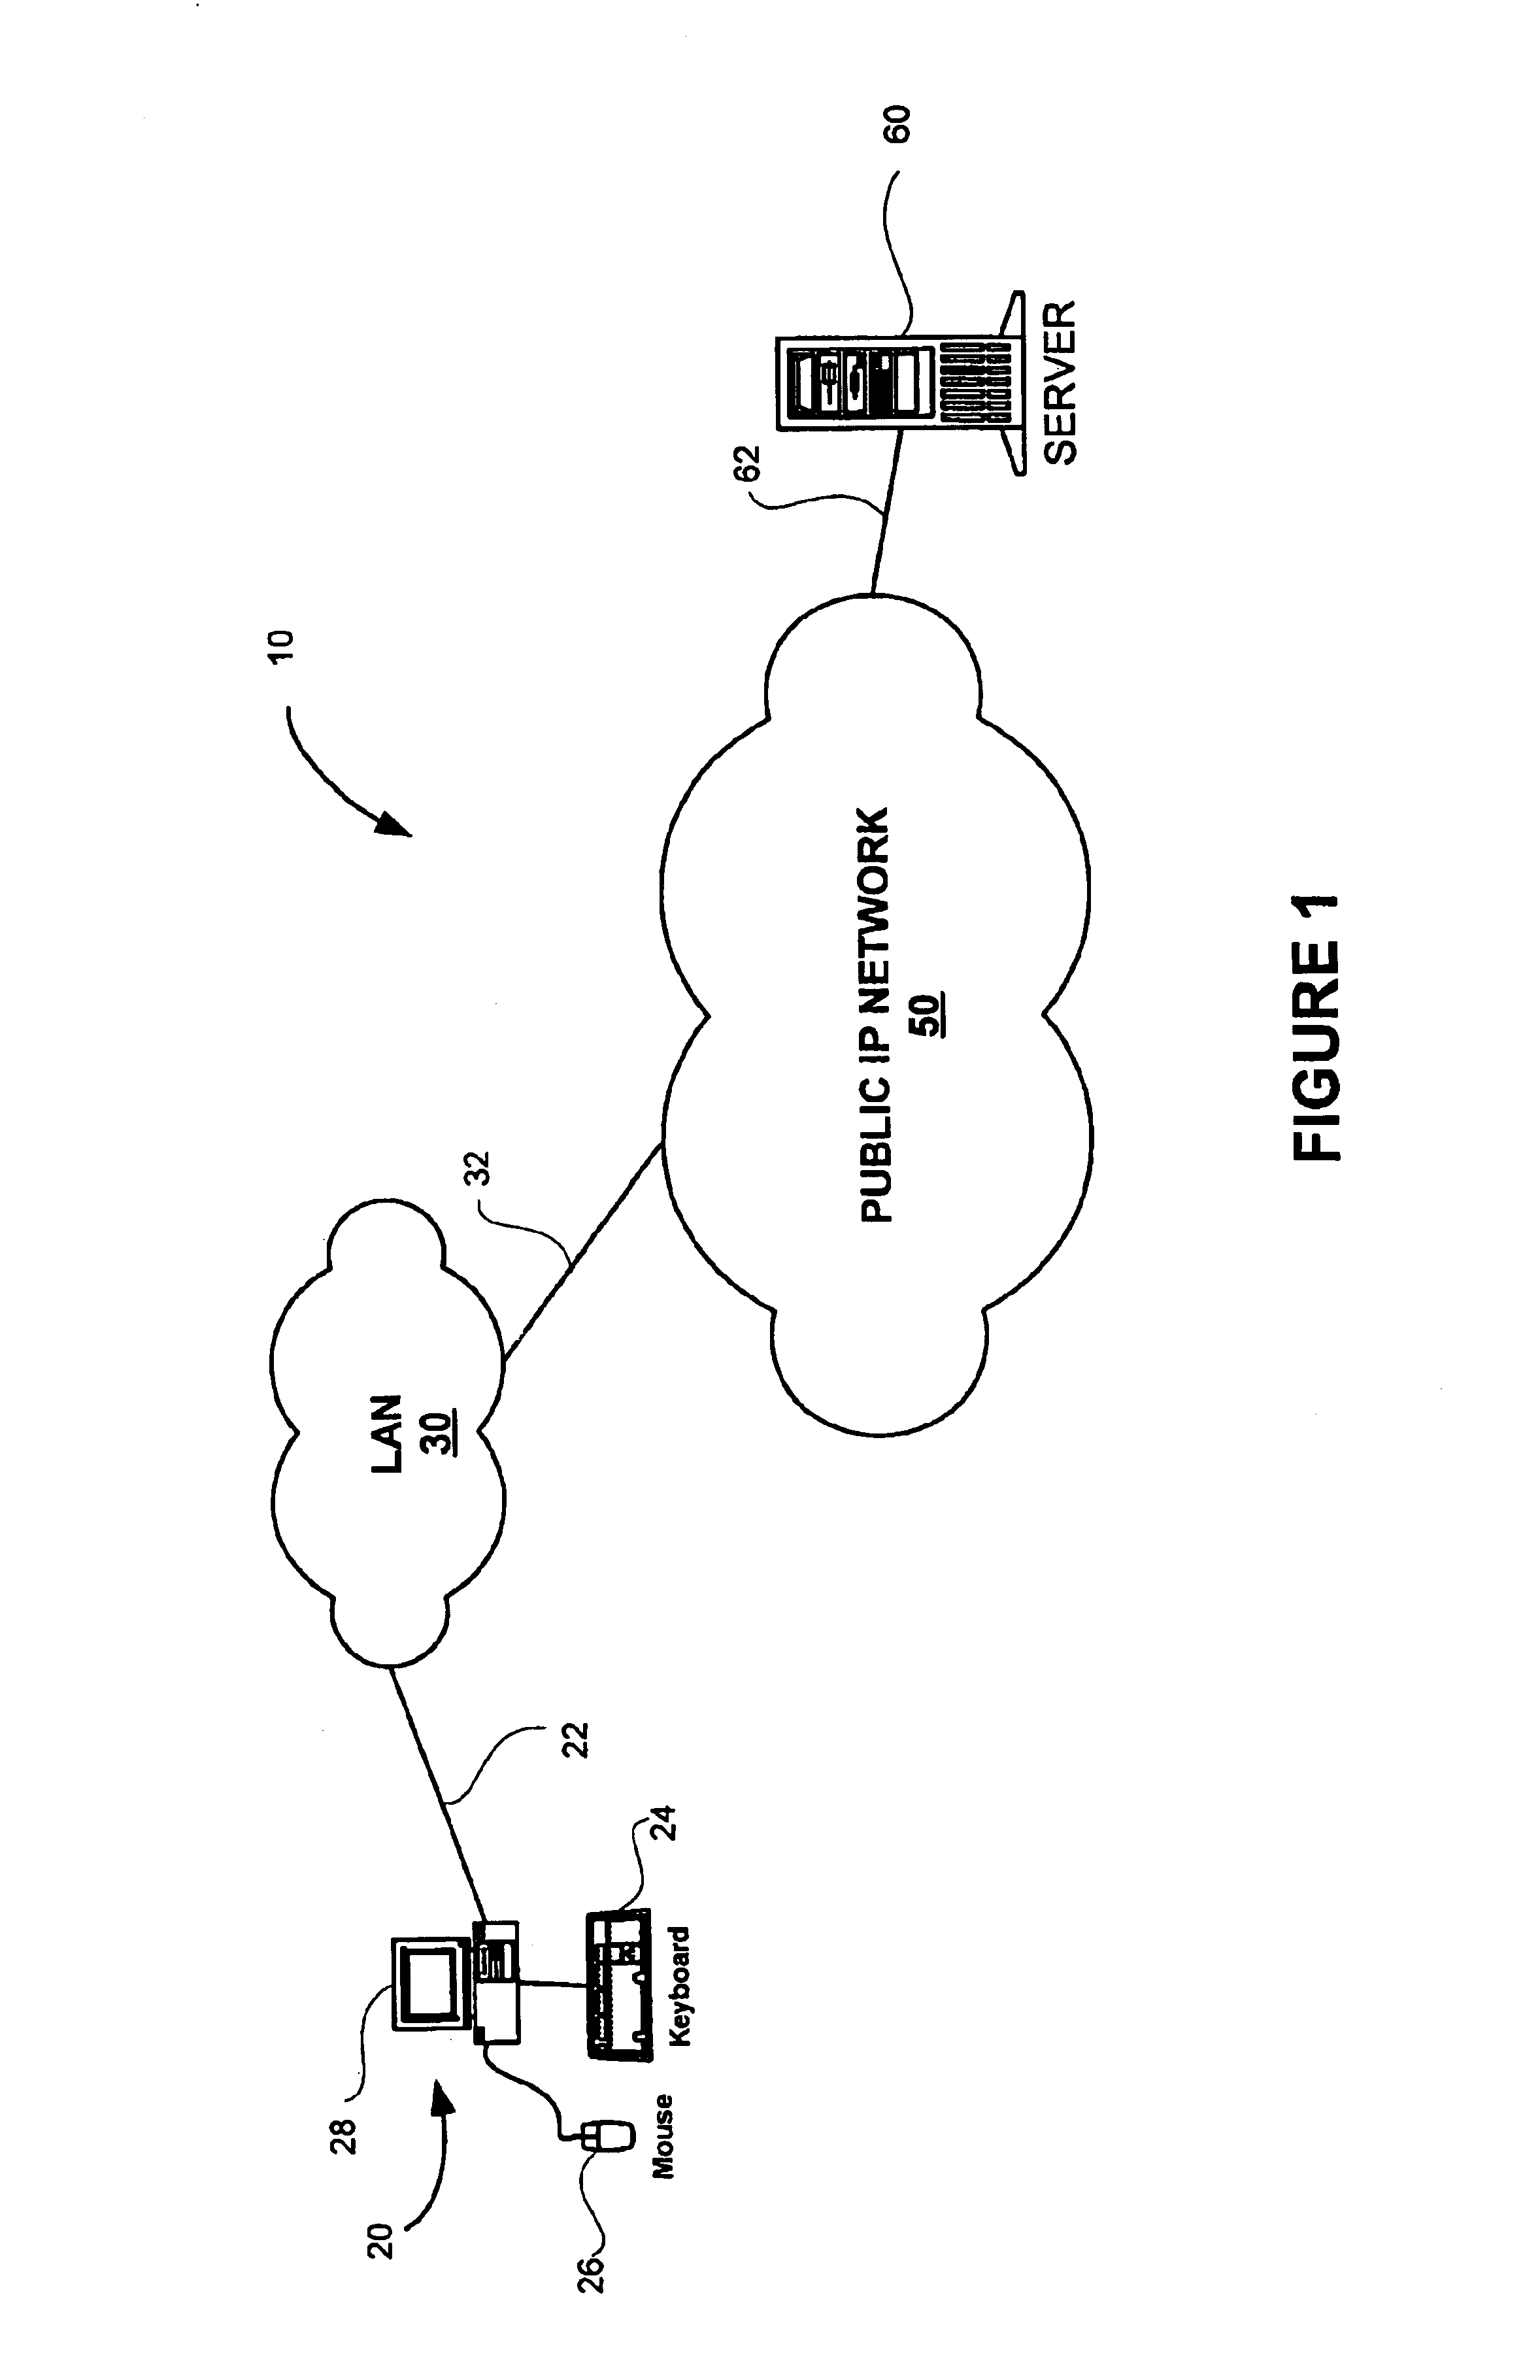 System and method for automatically configuring a client device